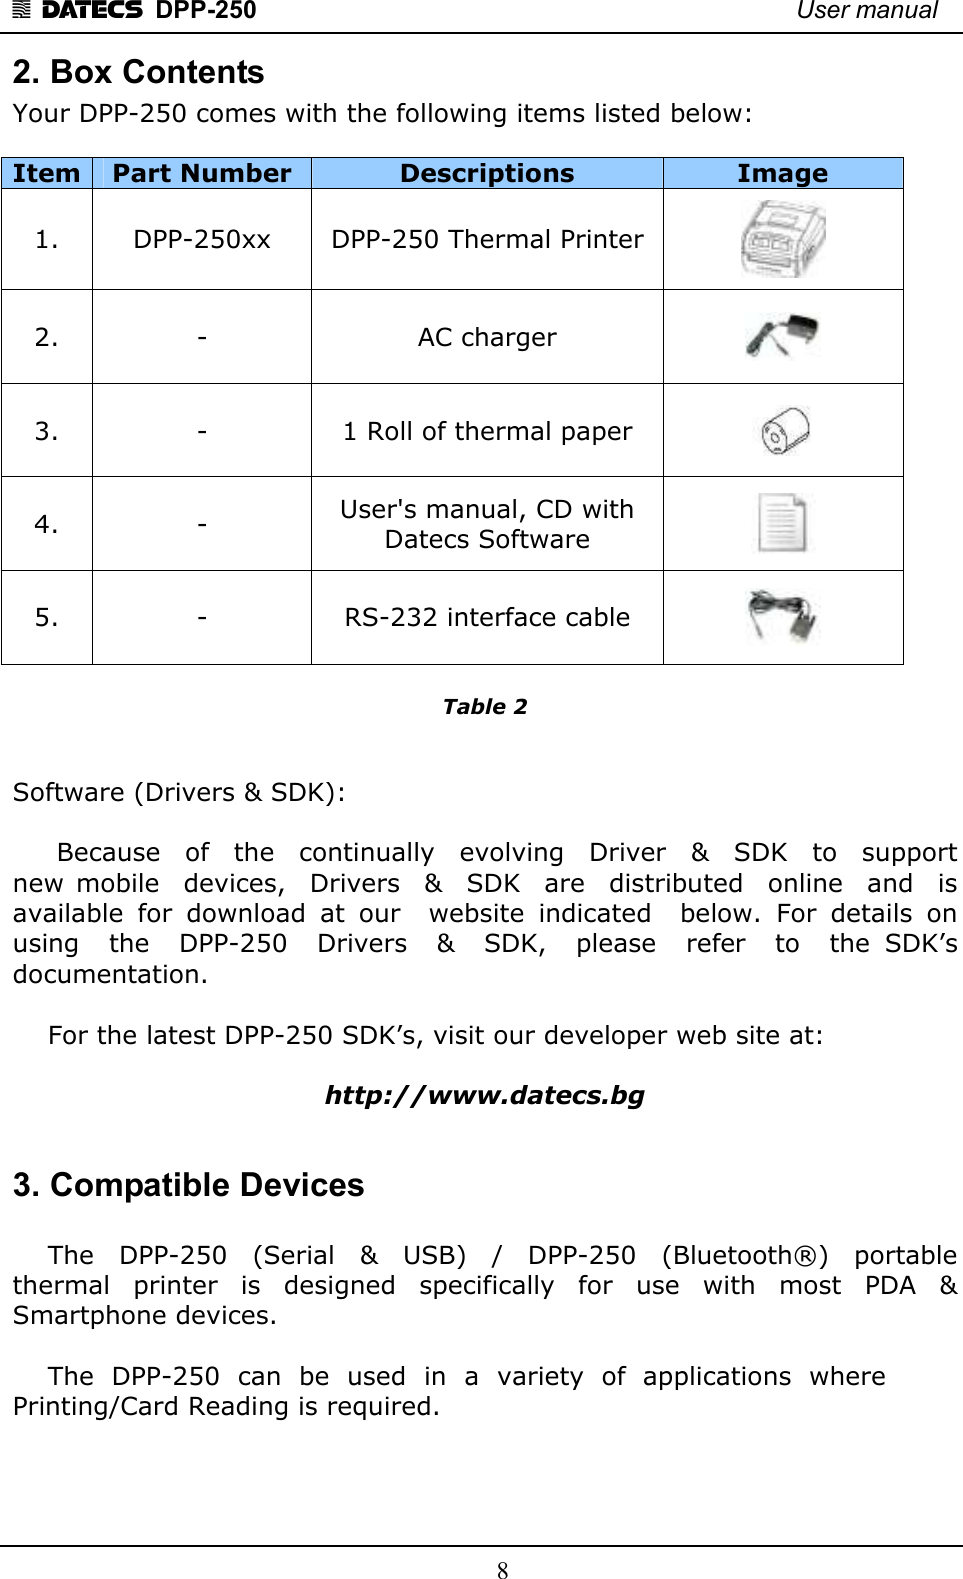 1 DATECS  DPP-250    User manual     8 2. Box Contents Your DPP-250 comes with the following items listed below:  Item Part Number  Descriptions  Image 1.  DPP-250xx  DPP-250 Thermal Printer  2.  -  AC charger   3.  -  1 Roll of thermal paper   4.  -  User&apos;s manual, CD with  Datecs Software   5.  -  RS-232 interface cable    Table 2   Software (Drivers &amp; SDK):        Because    of    the    continually    evolving    Driver    &amp;    SDK    to    support  new  mobile    devices,    Drivers    &amp;    SDK    are    distributed    online    and    is available  for  download  at  our    website  indicated    below.  For  details  on  using    the    DPP-250    Drivers    &amp;    SDK,    please    refer    to    the  SDK’s  documentation.       For the latest DPP-250 SDK’s, visit our developer web site at:   http://www.datecs.bg  3. Compatible Devices      The    DPP-250    (Serial    &amp;    USB)    /    DPP-250    (Bluetooth®)    portable thermal  printer   is   designed  specifically   for   use  with  most   PDA   &amp; Smartphone devices.         The  DPP-250  can  be  used  in  a  variety  of  applications  where  Printing/Card Reading is required.       